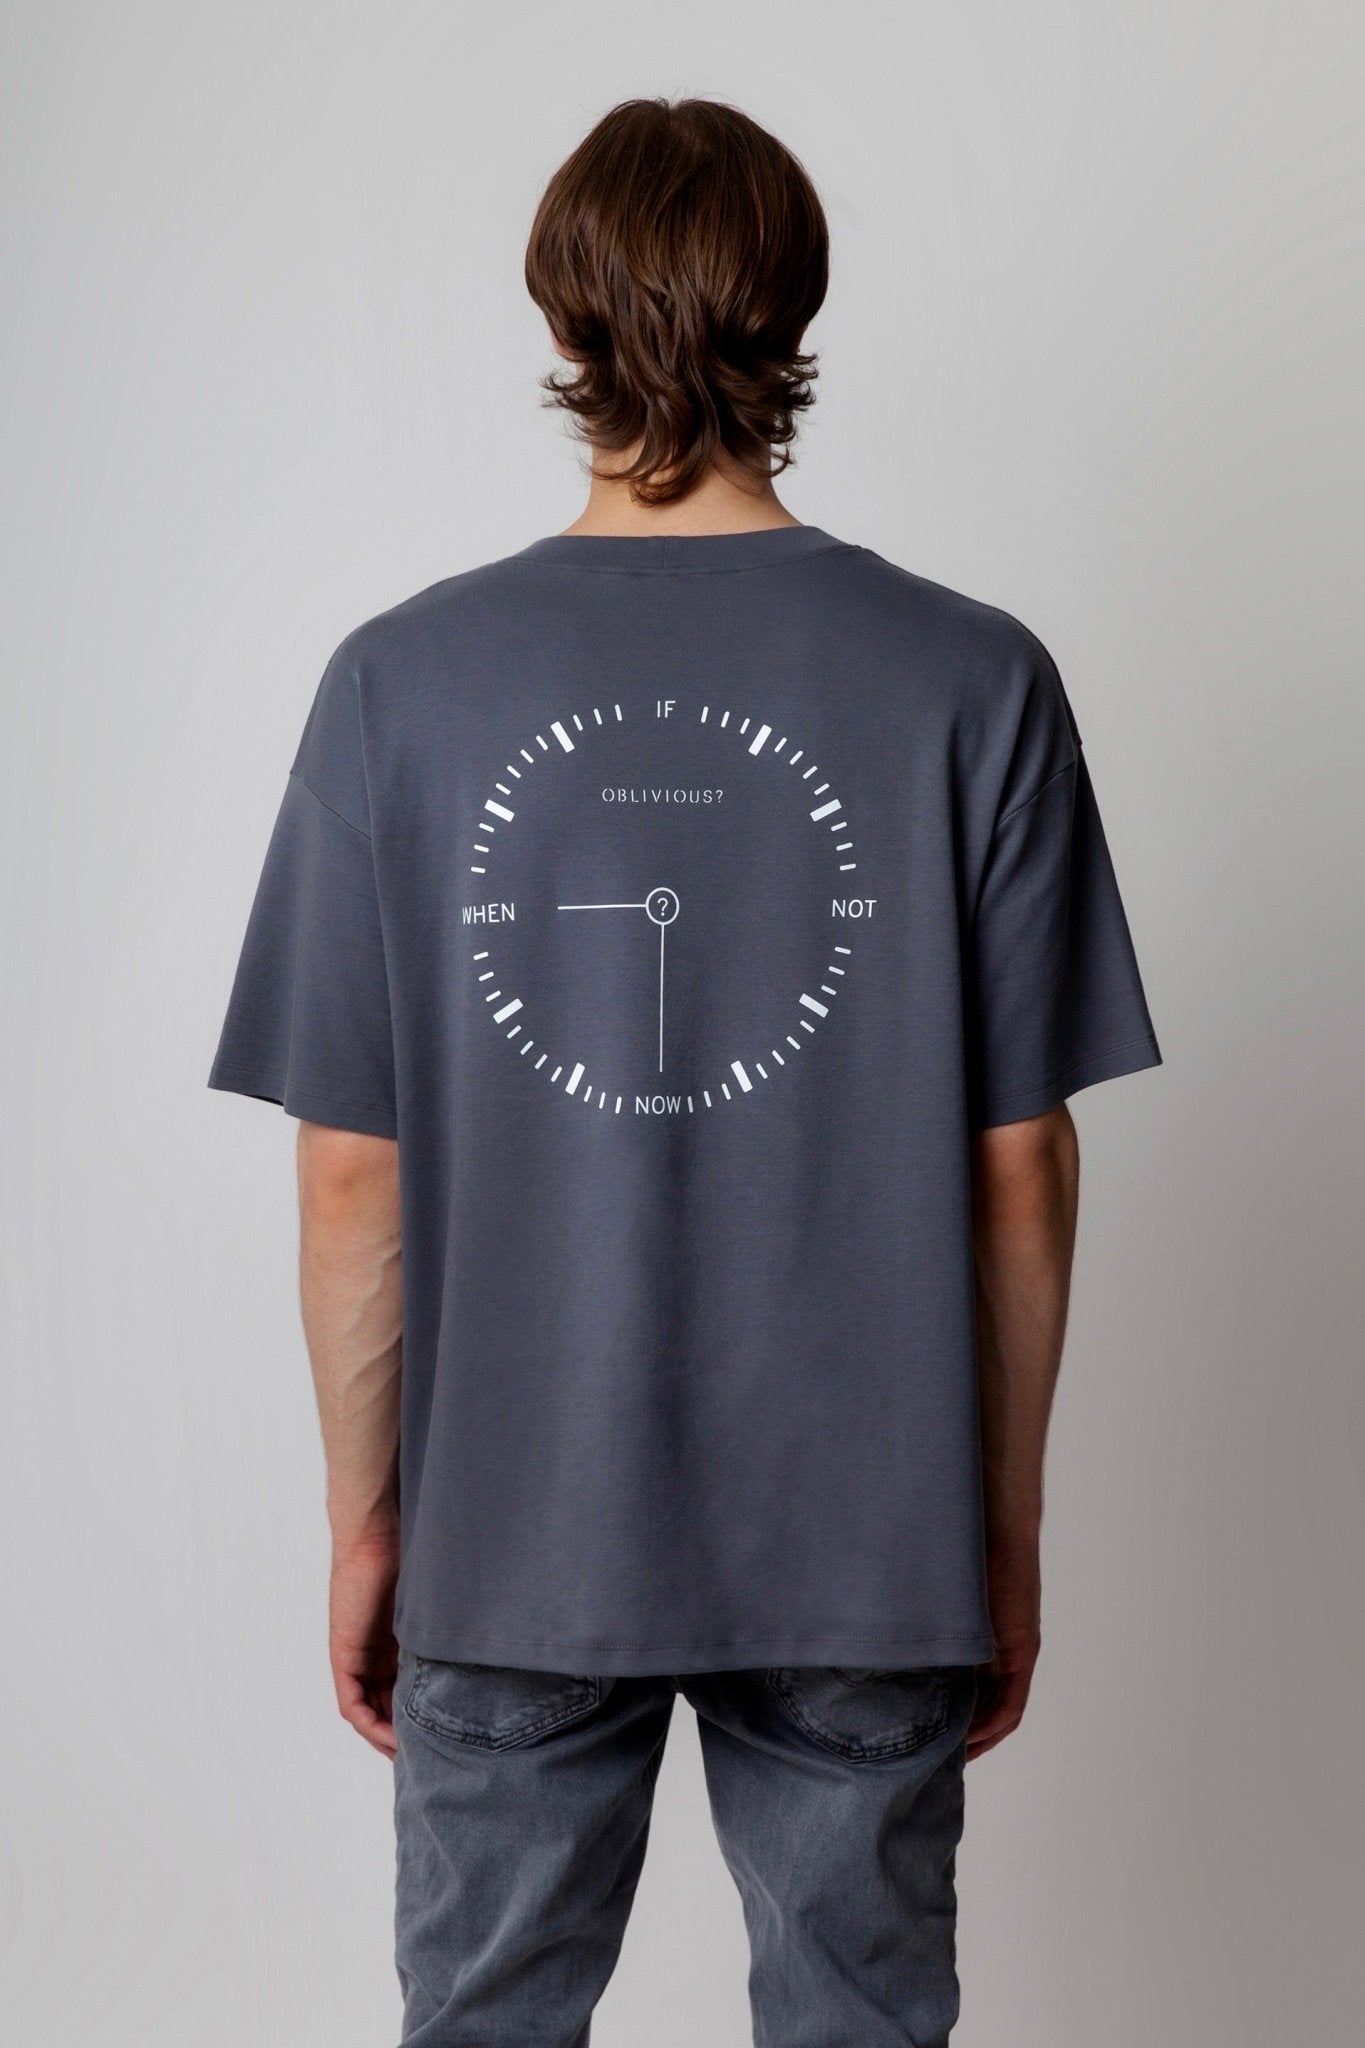 If Not Now, When? Anthracite T-Shirt - OBLIVIOUS?